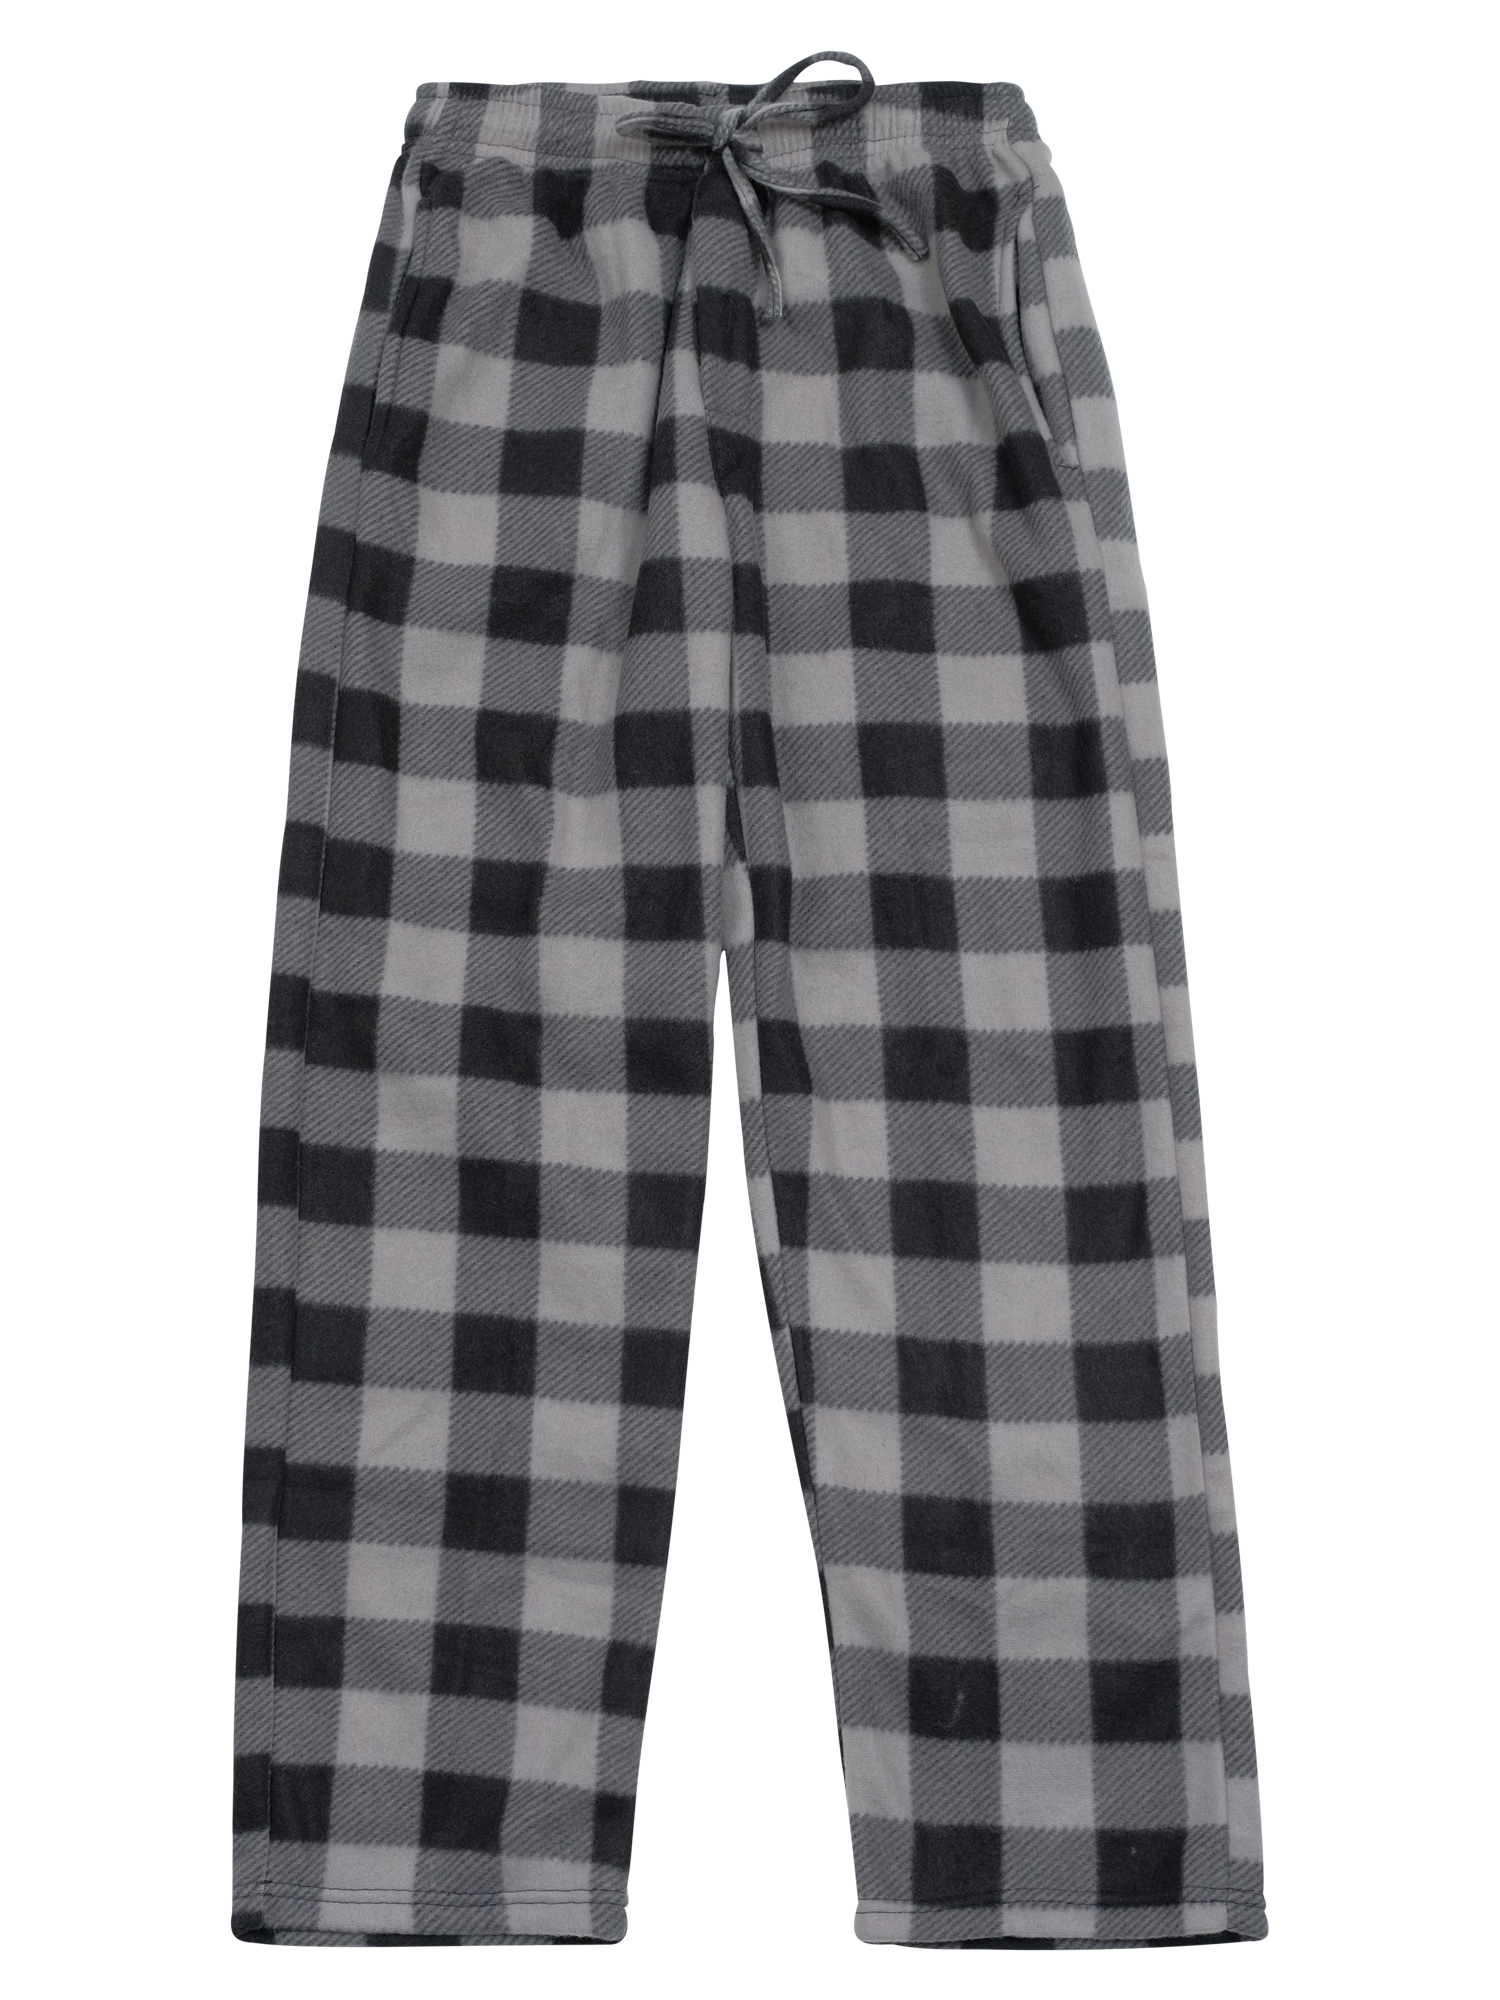 Real Essentials Boys Super-Soft Fleece 3-Pack Pajama Pant Sizes 5-18 - image 8 of 8